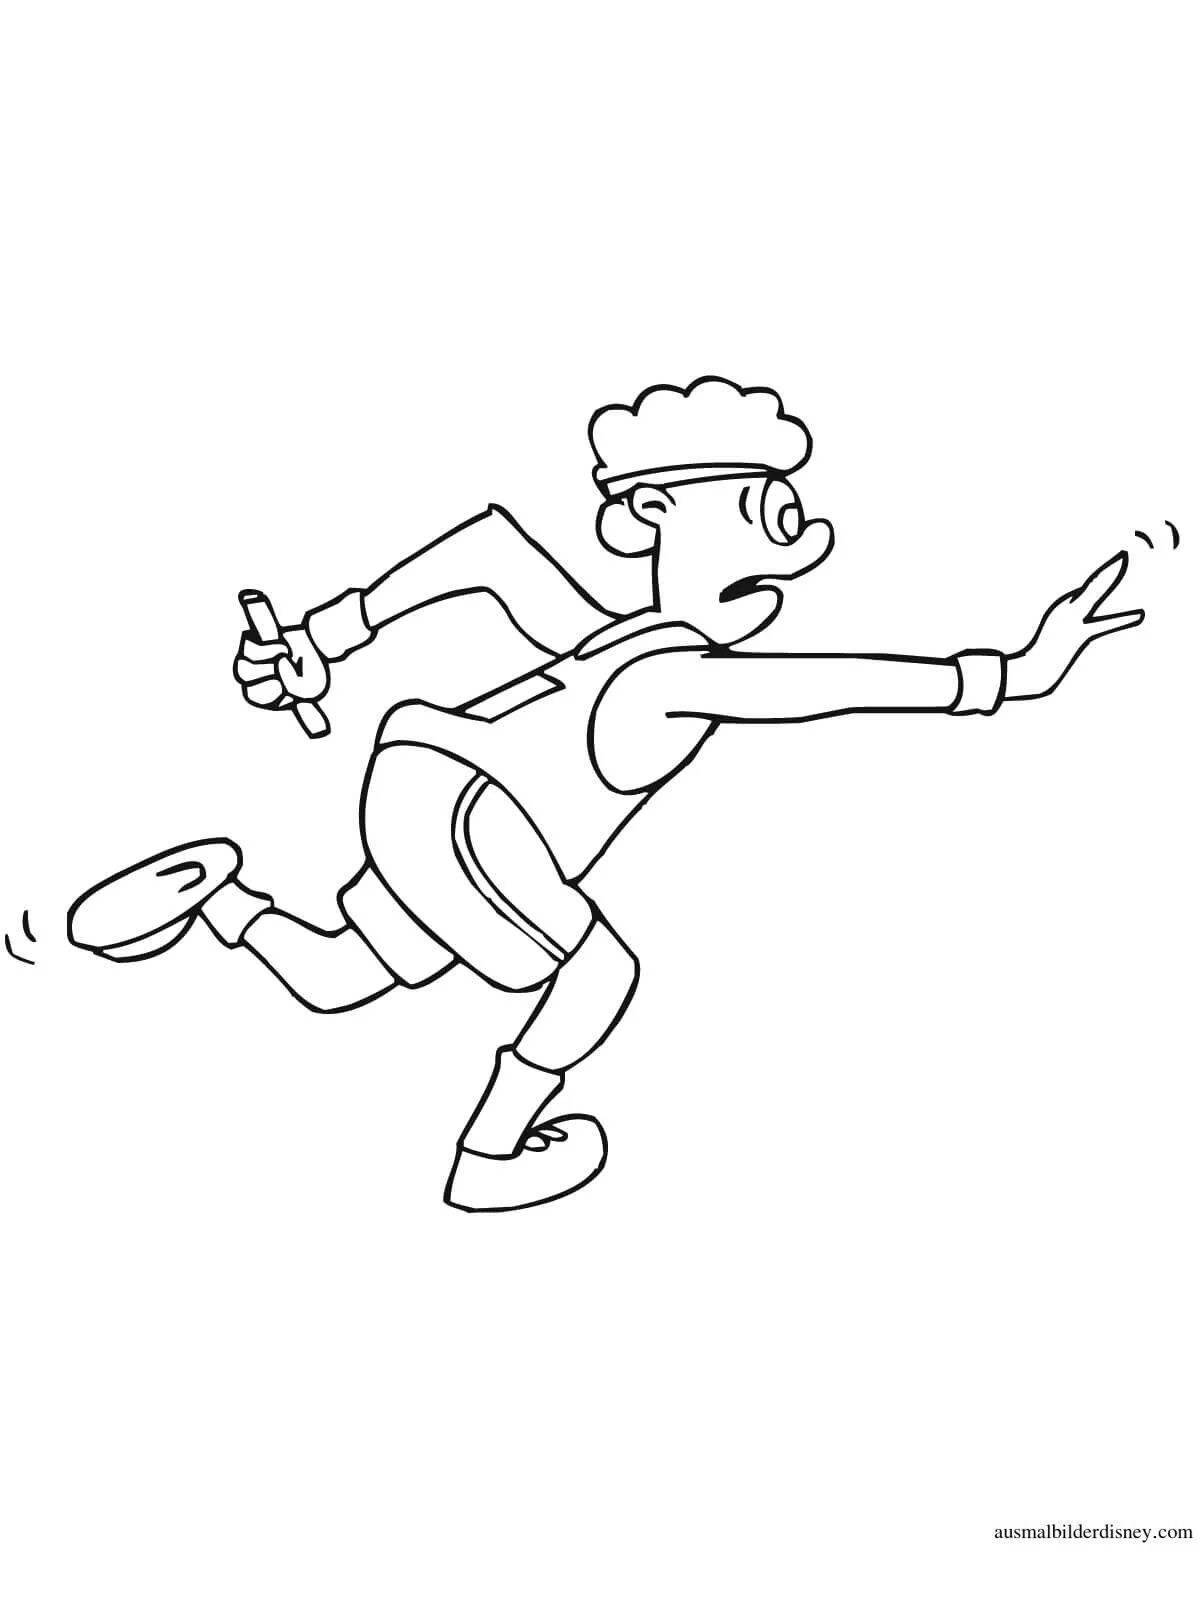 Dynamic Run coloring page